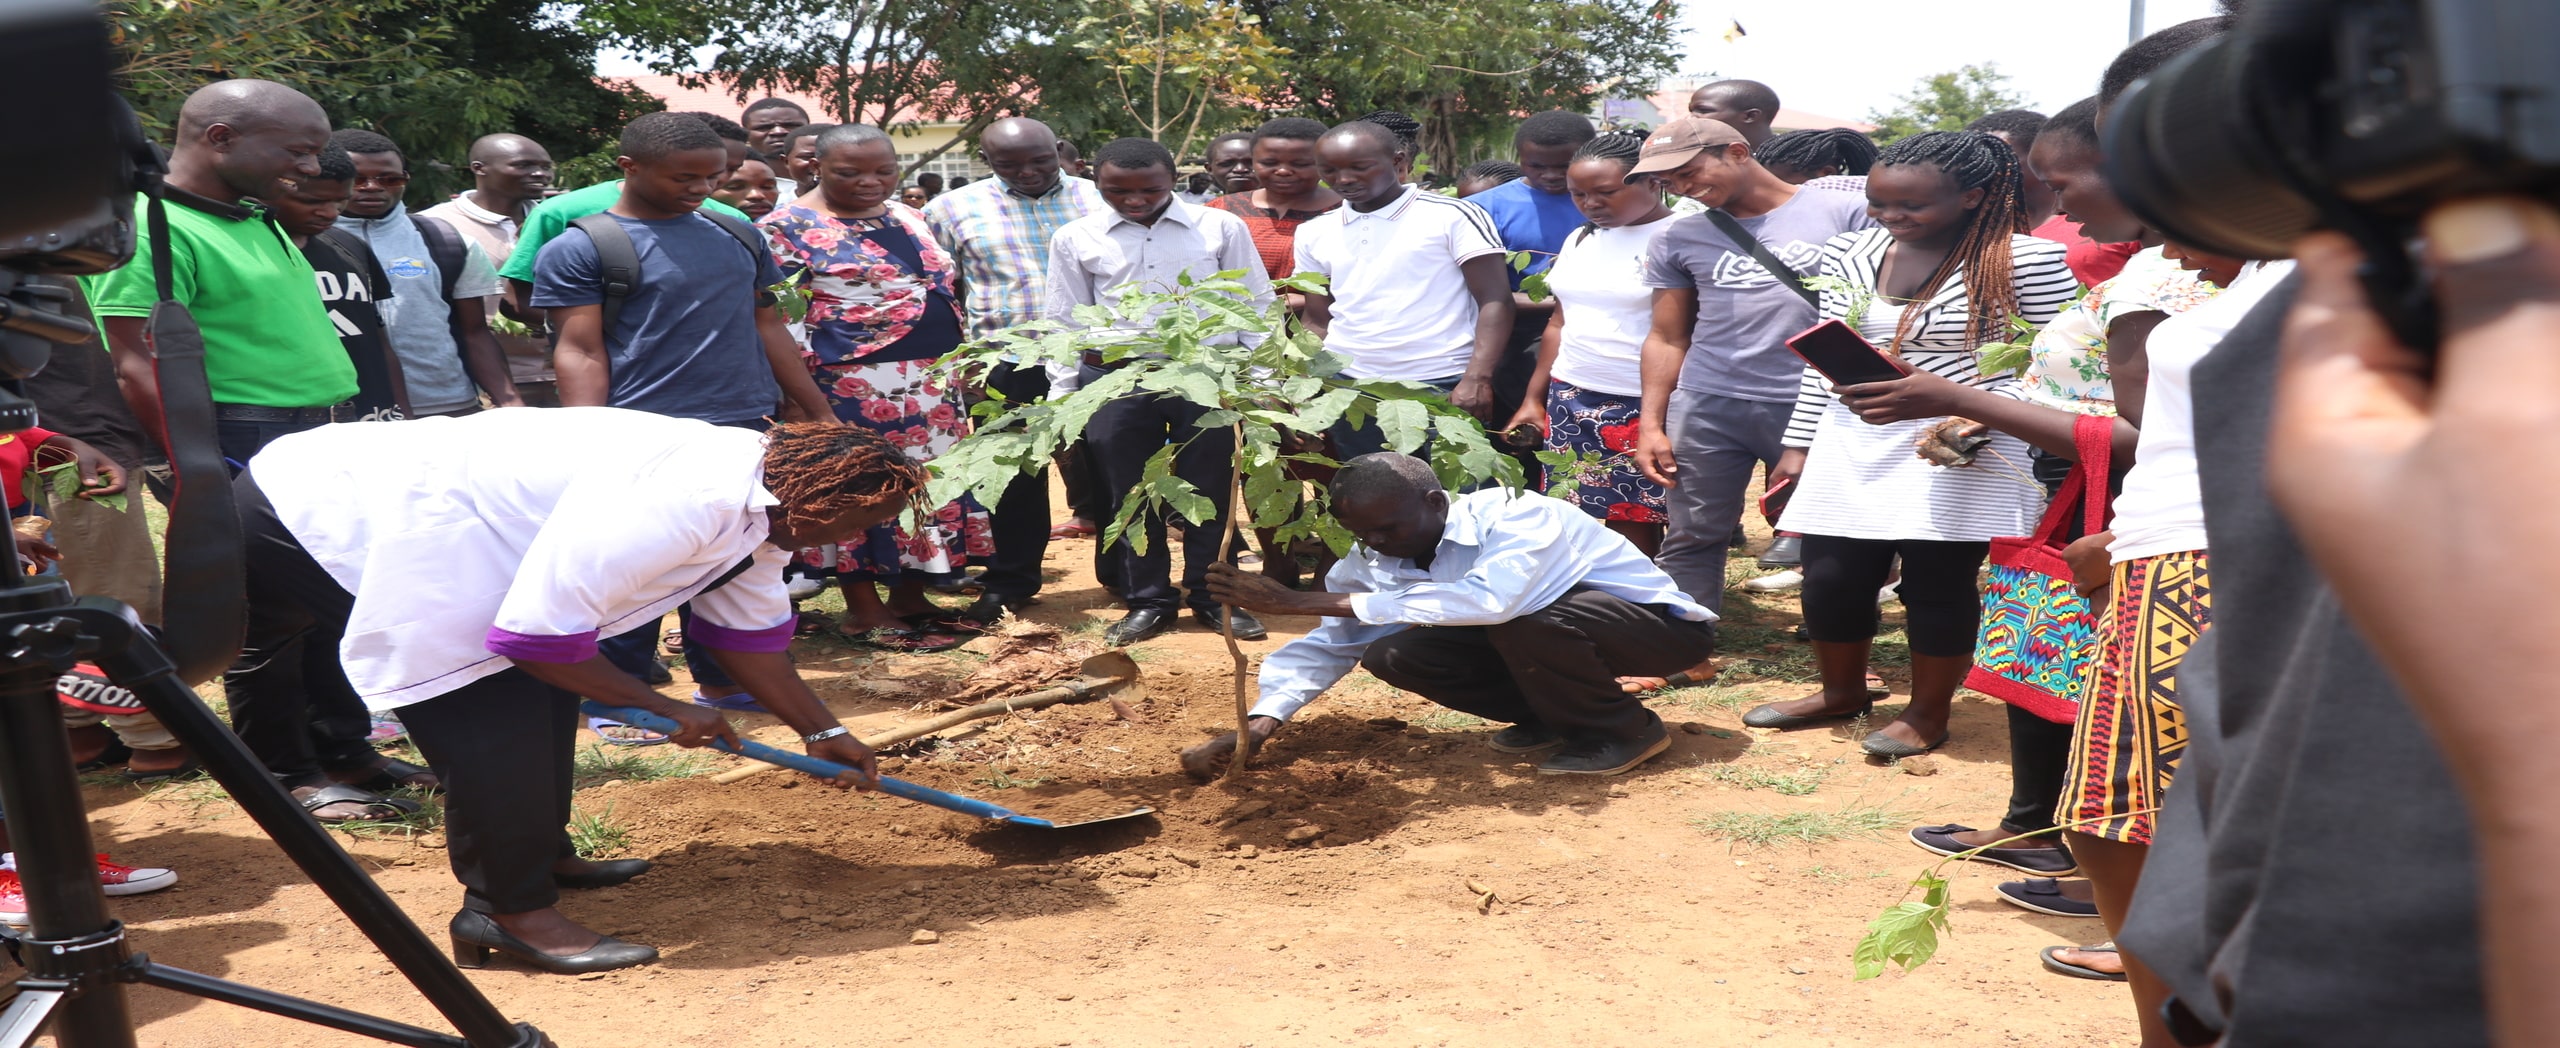 The DVC (AFD) Prof. Emmy Kipsoi leads Alupe university staff and students in conjunction with AU peace club, Linda mazingira, Dedan kimathi foundation and Kenya forest service in planting over 10,000 tree seedlings in alupe university grounds.